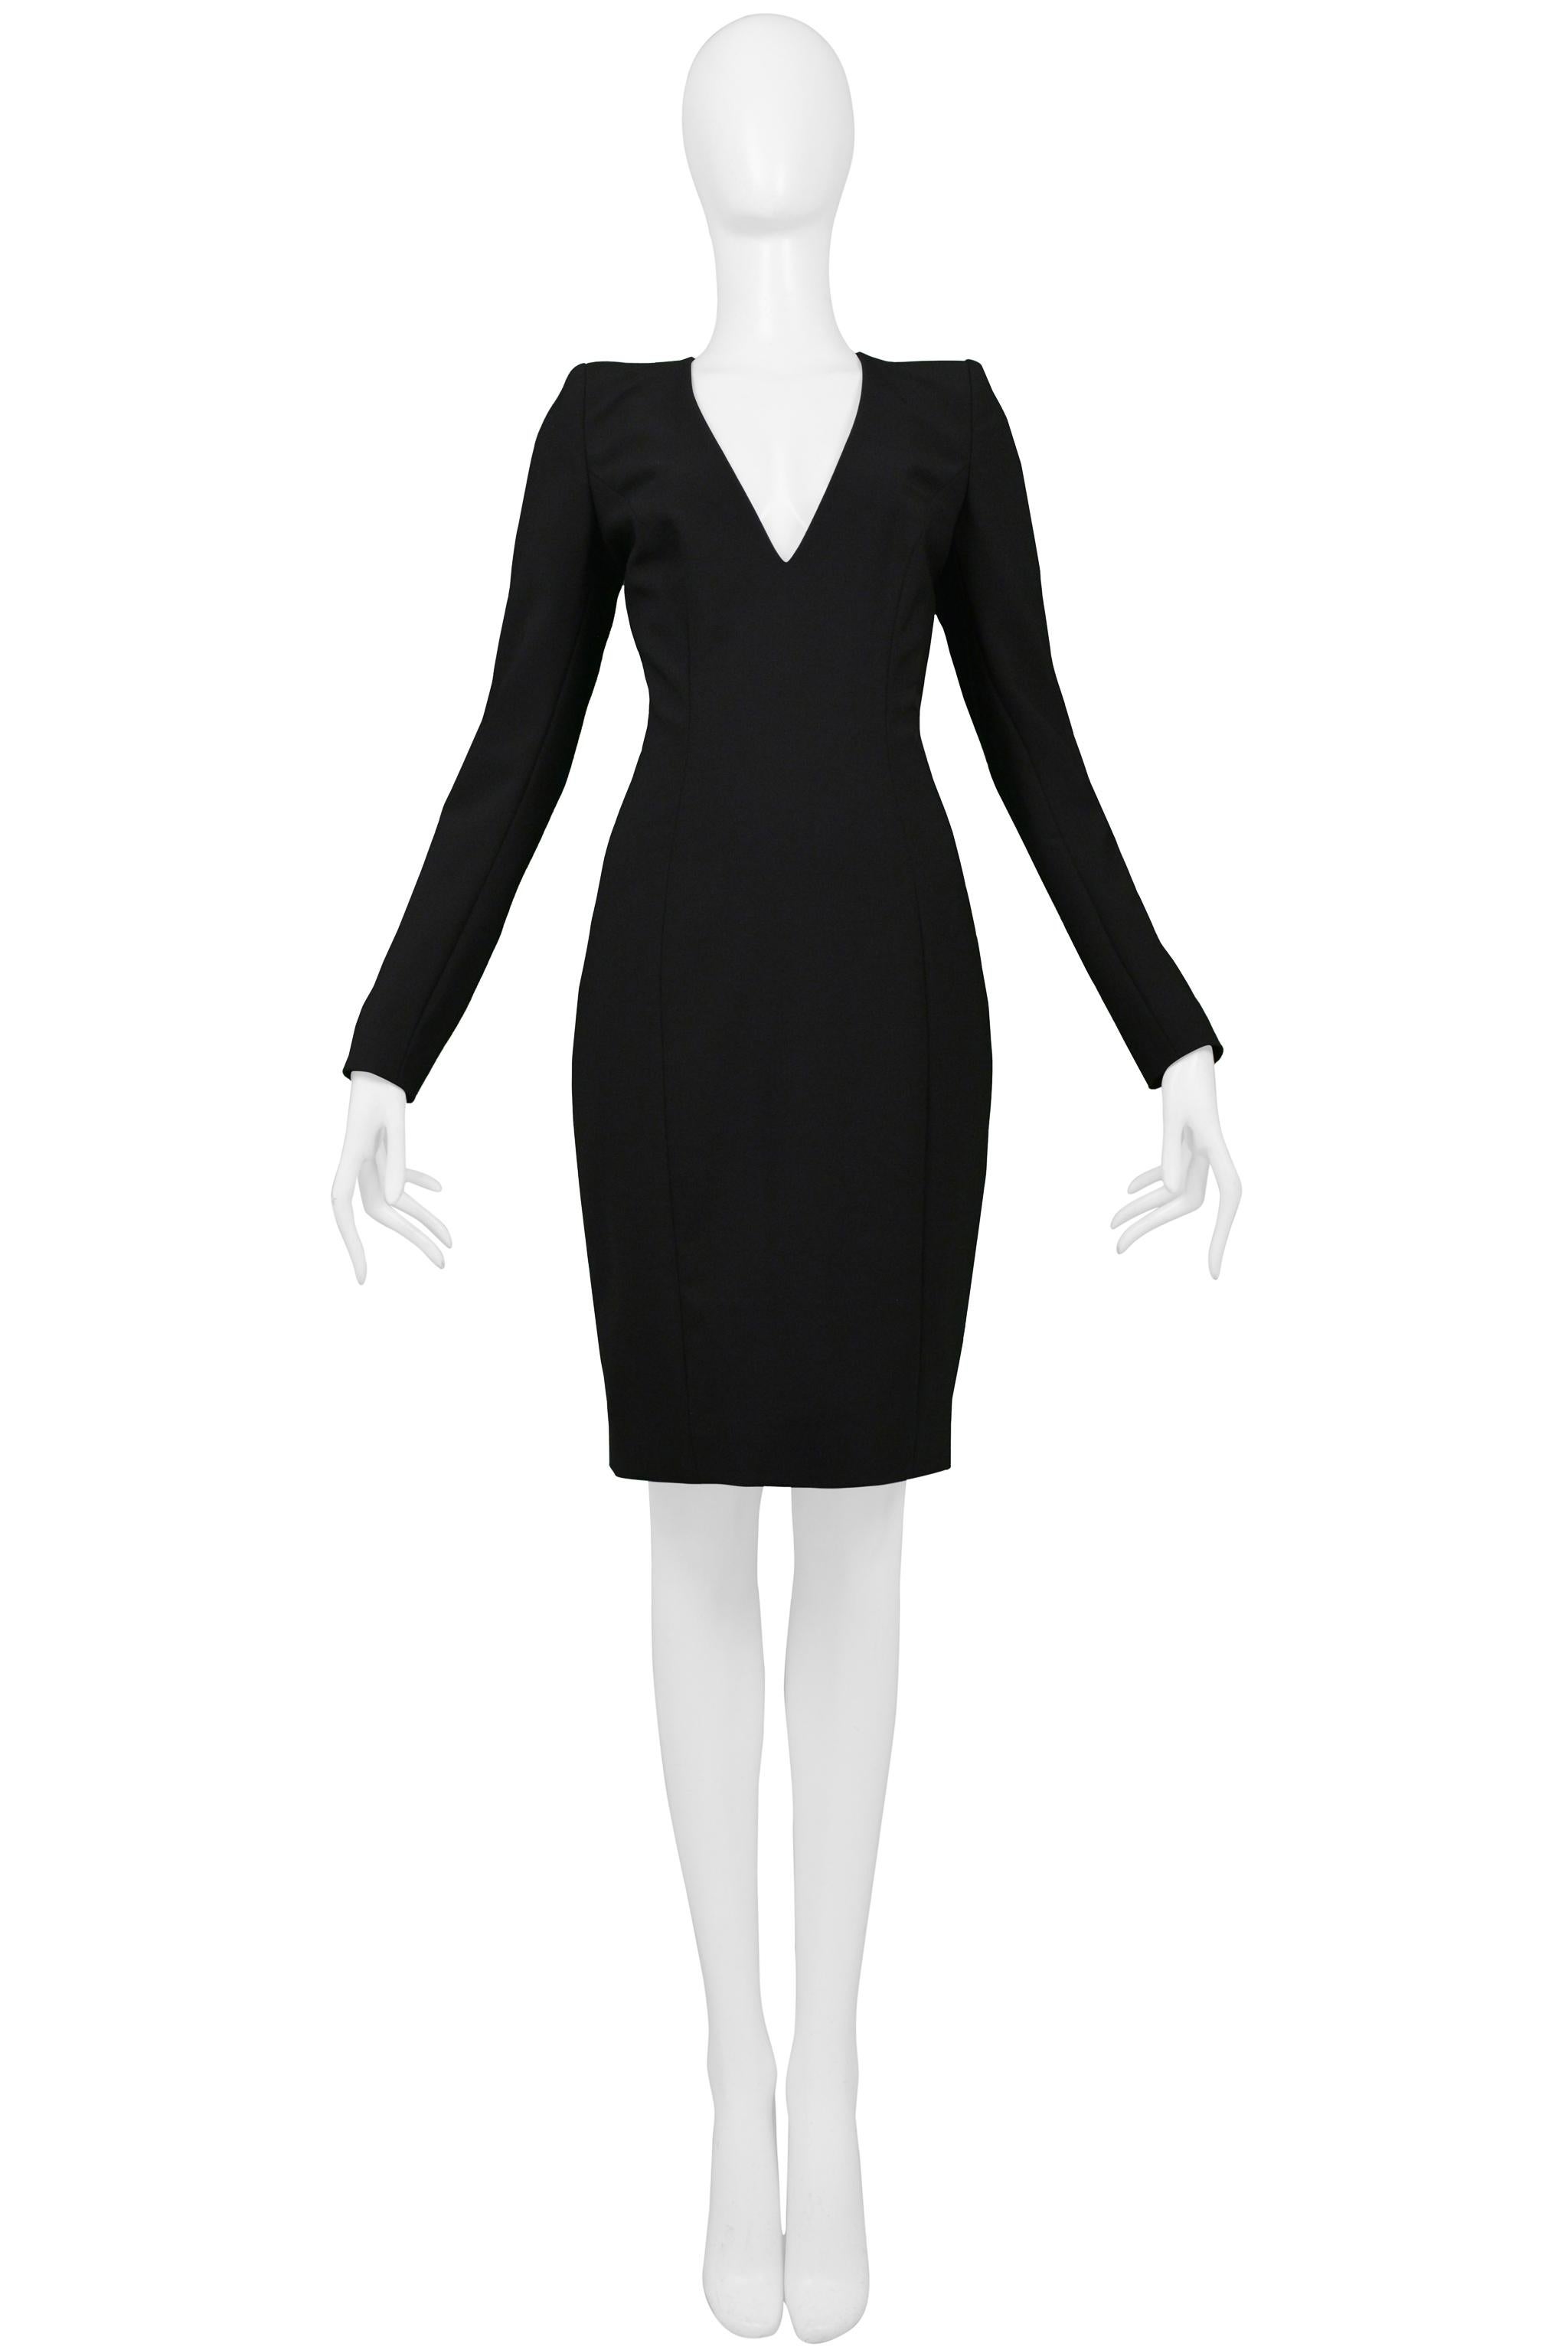 Resurrection is excited to offer a stunning vintage John Galliano black widow cocktail dress featuring a deep V neckline, long sleeves with covered buttons, shoulder pads, curved seams, and a fitted body. From the 1997 collection.

John